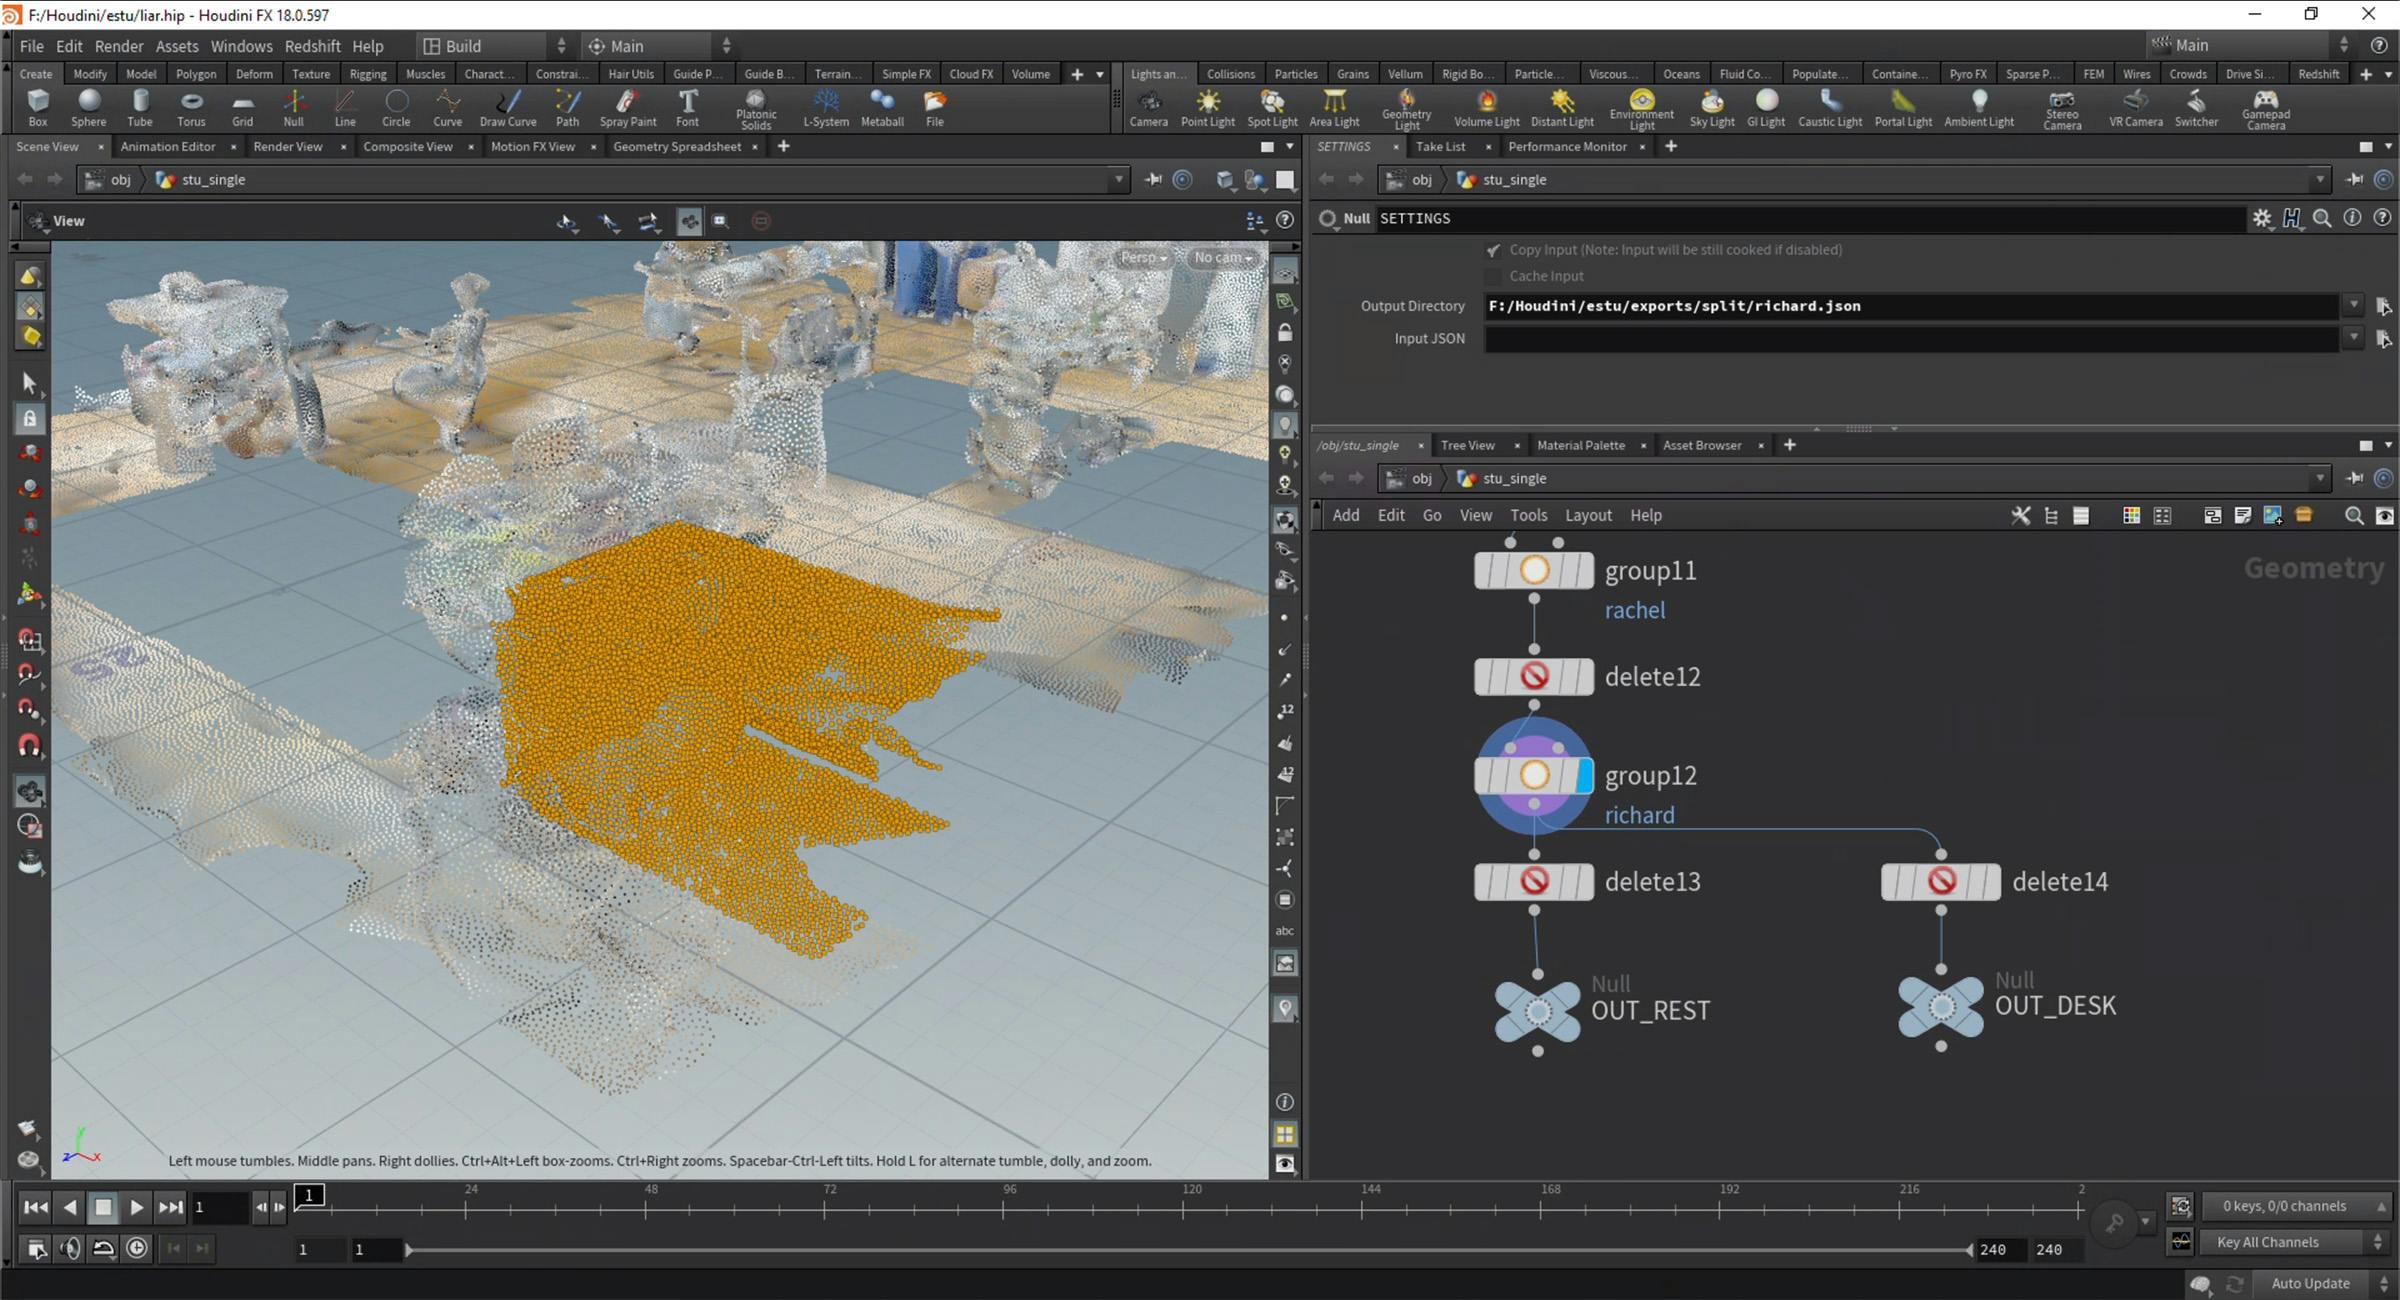 Splitting up individual desks into separate pieces in Houdini.